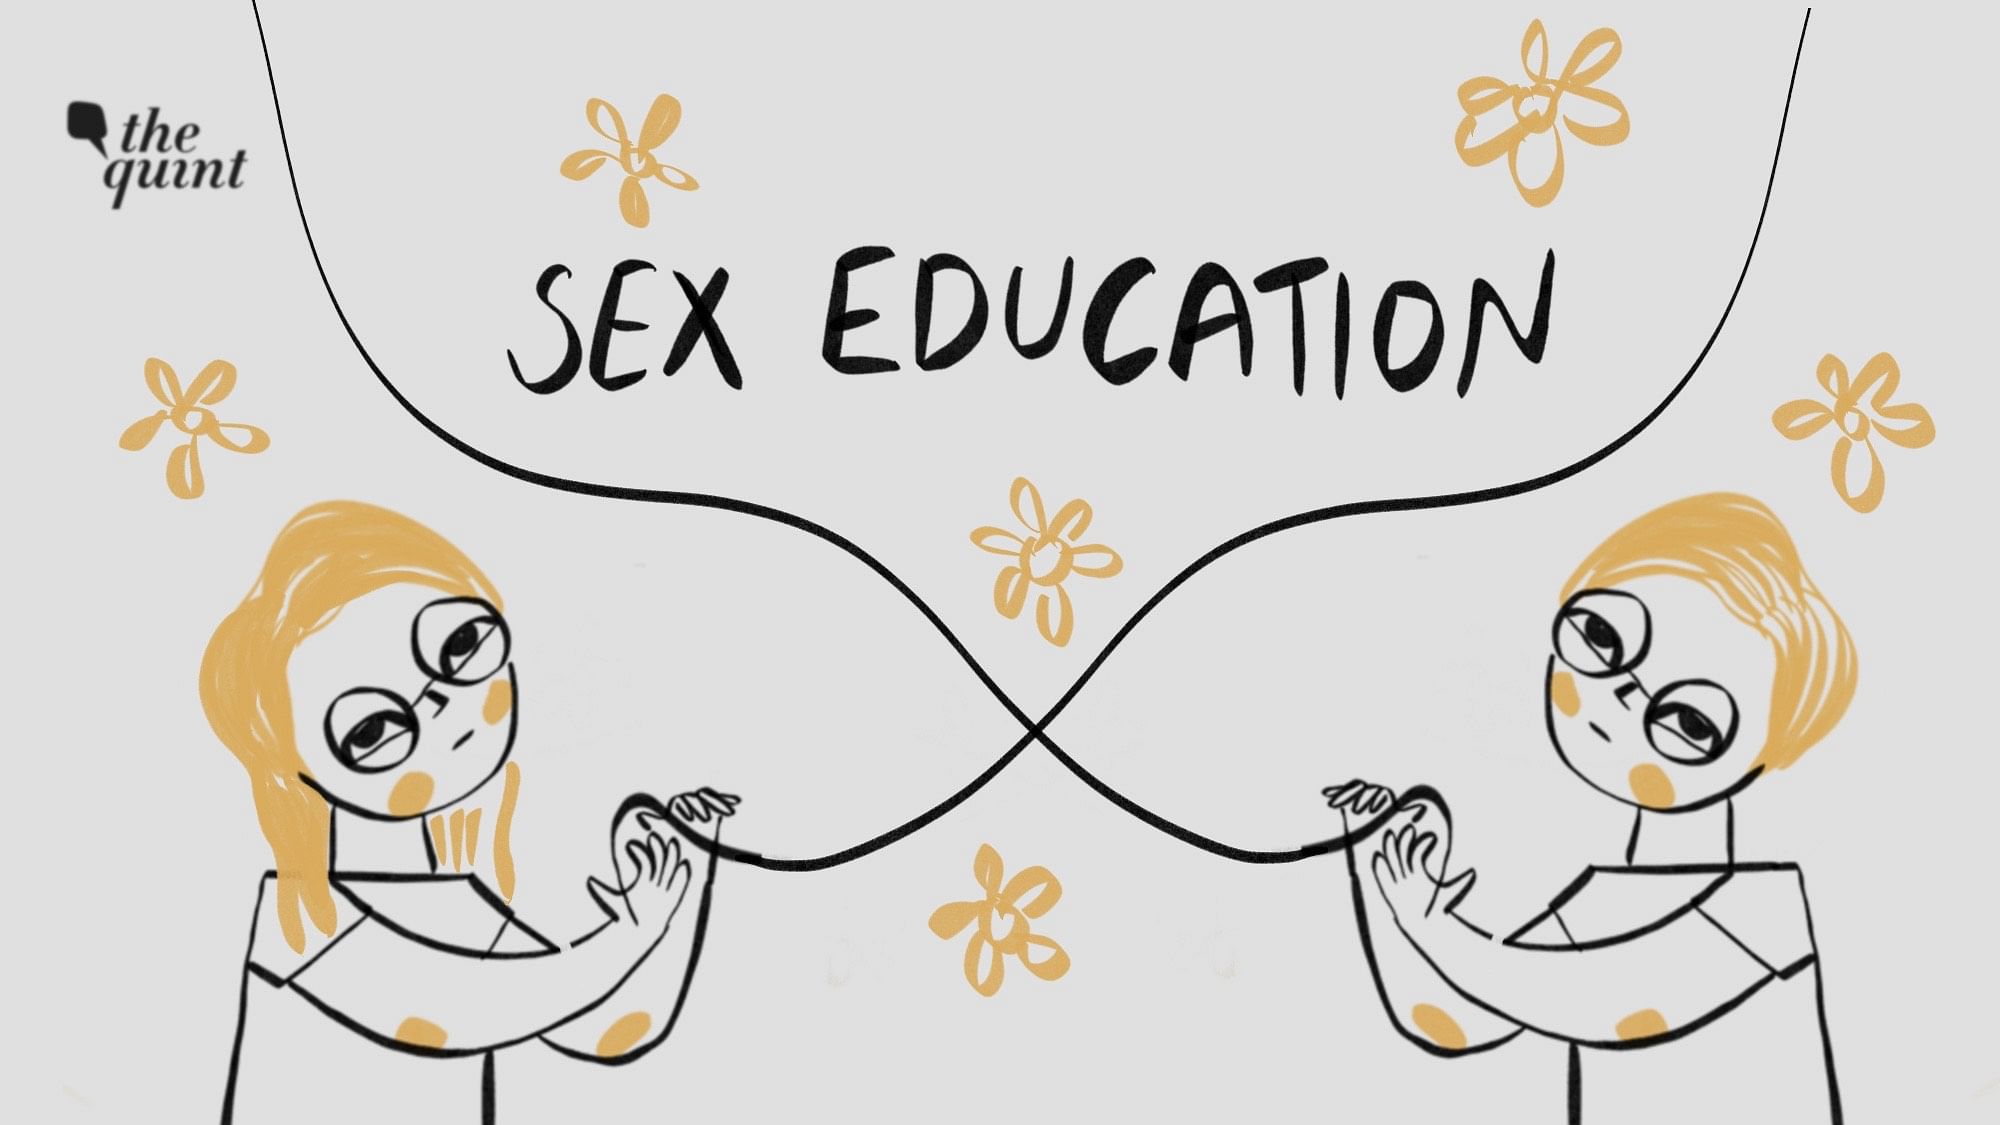 Schoolsex Tamil - Sex Education in India: India needs a comprehensive sex education plan